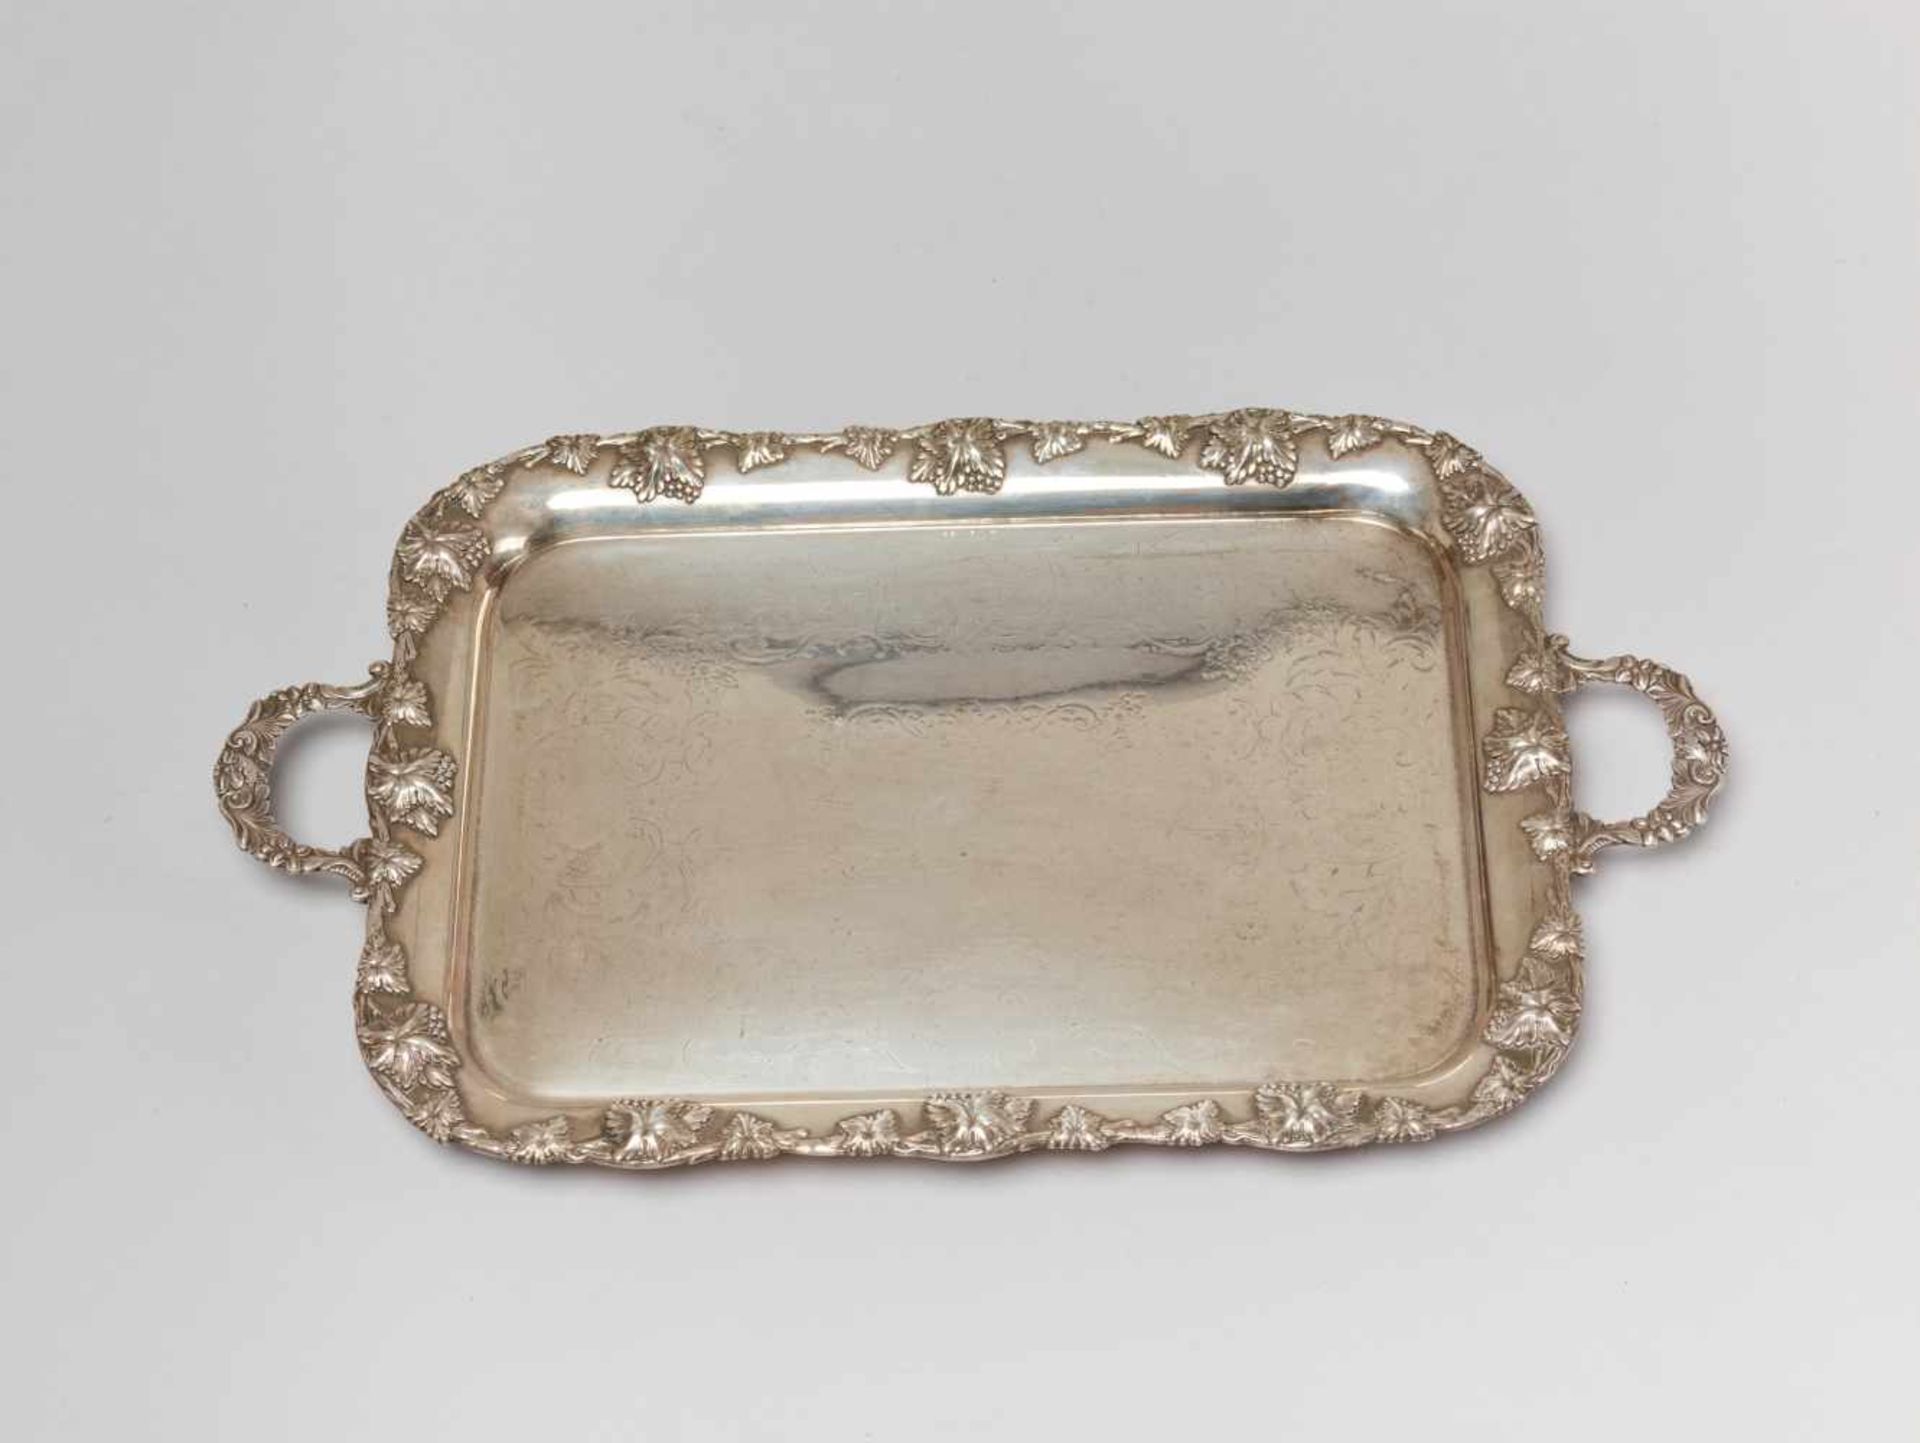 LARGE SILVER PLATE SERVING TRAY WITH WINE GRAPES DECORATION, 1900sSilver plate - Image 5 of 8